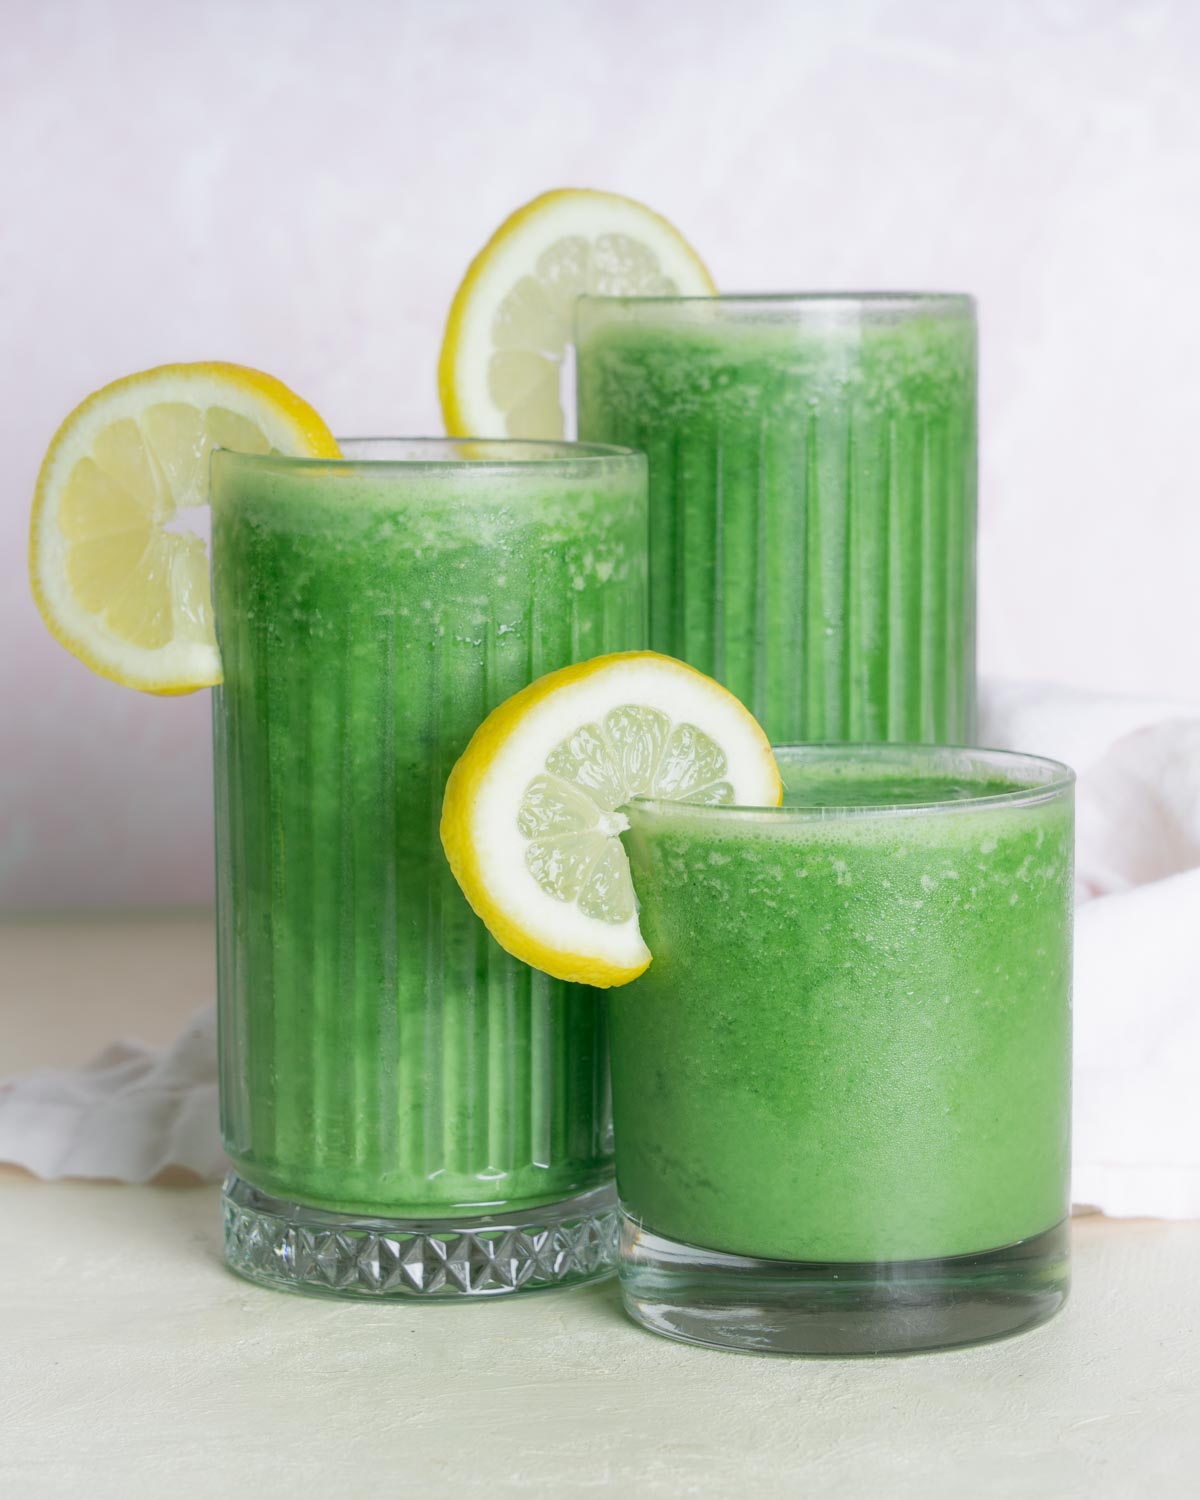 Green Morning Juice Smoothie with 3 classes of carrying heights. Garnished with a lemon slice.